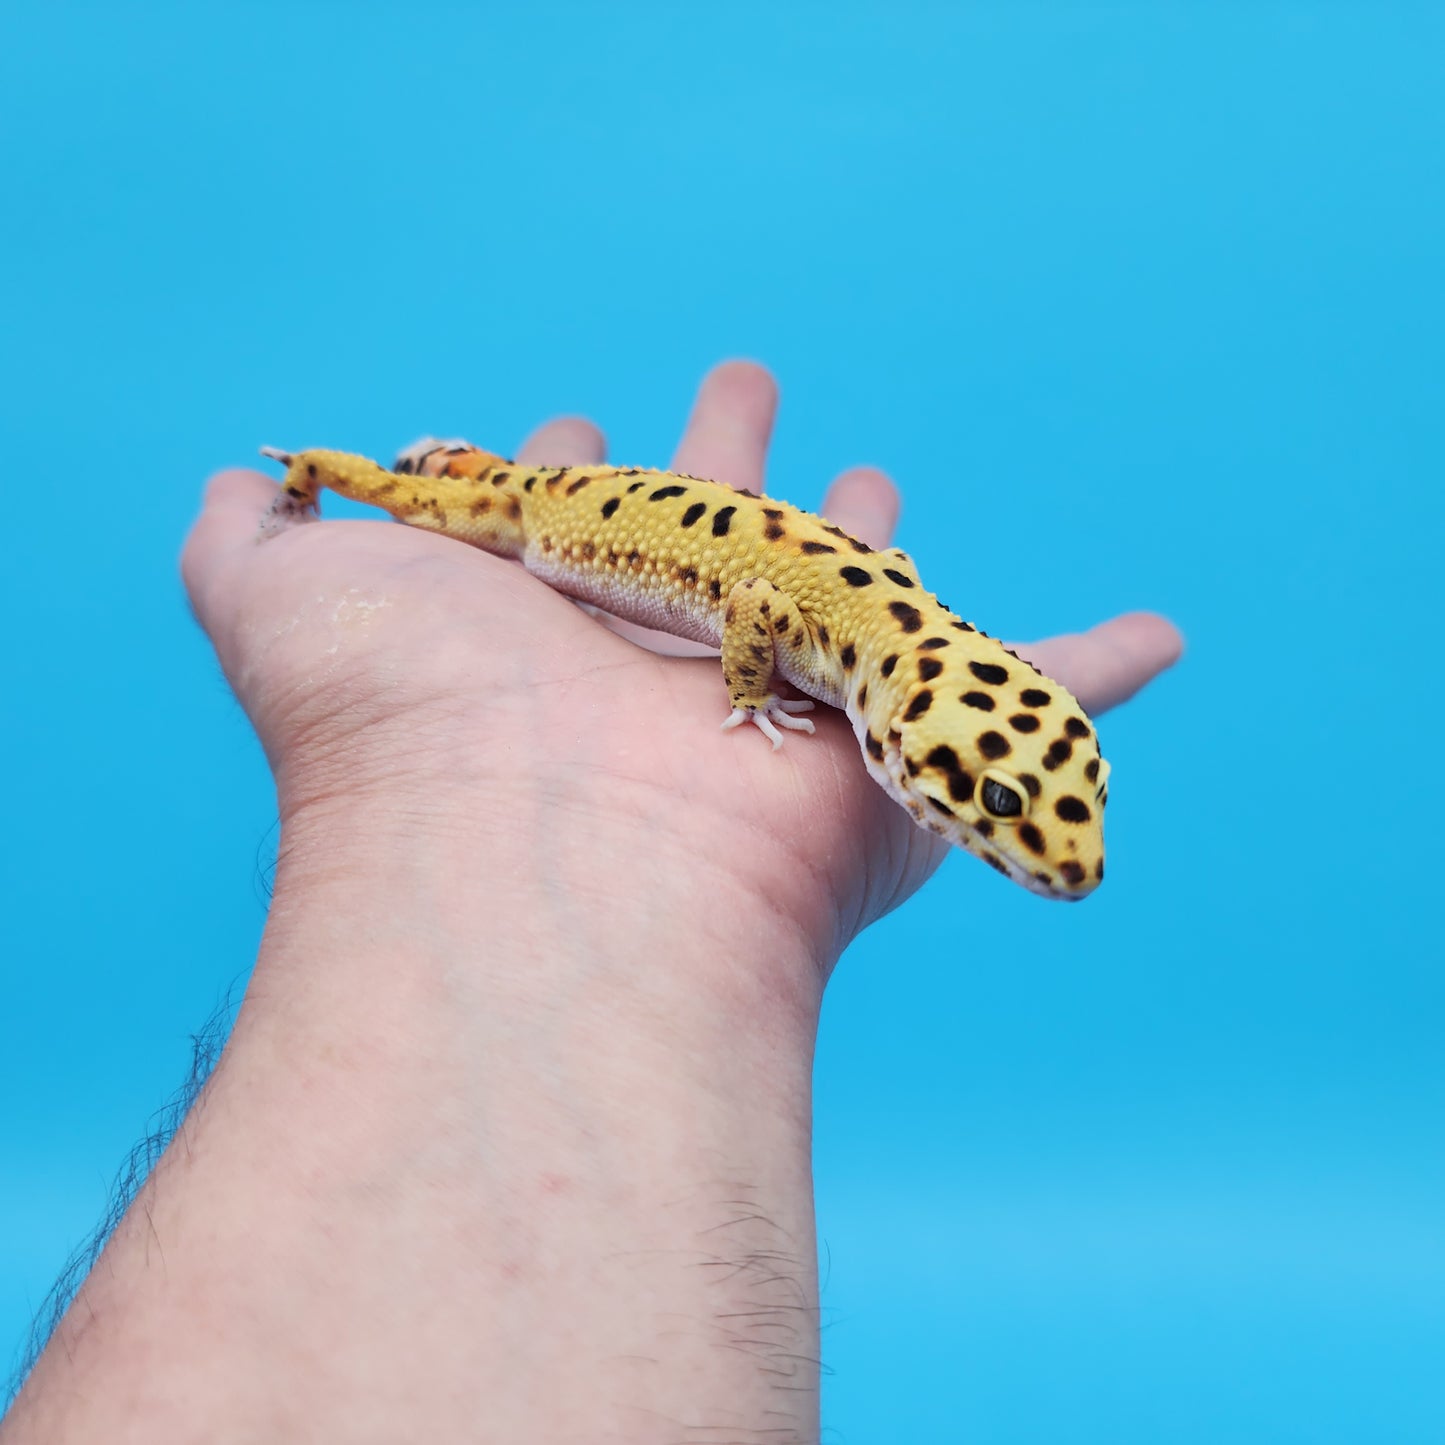 Male Inferno Tangerine Bold Emerine Possible White and Yellow Leopard Gecko (interesting look!)